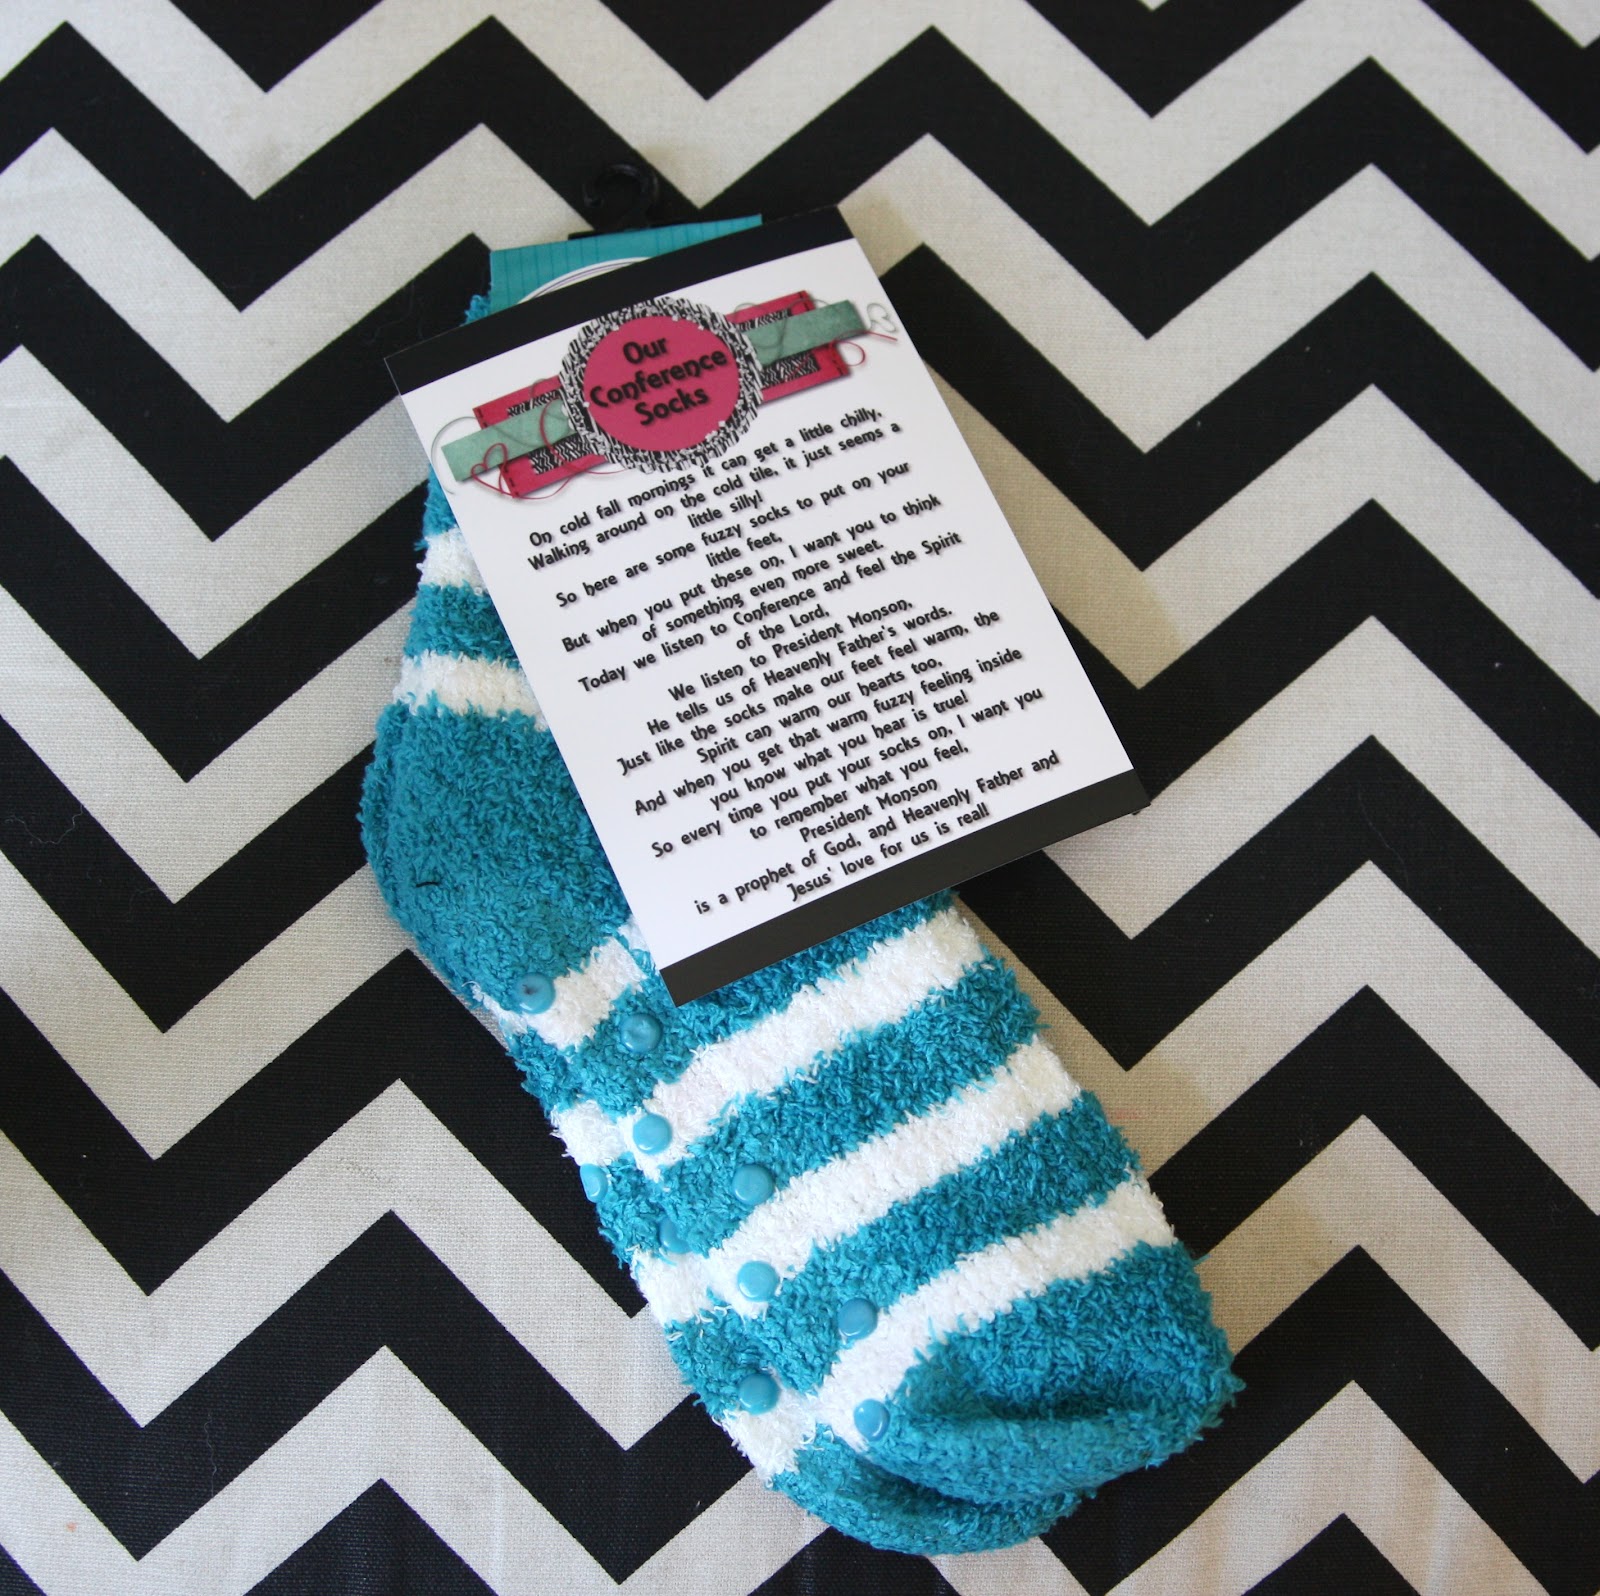 This-n-that; a little crafting: Conference Socks